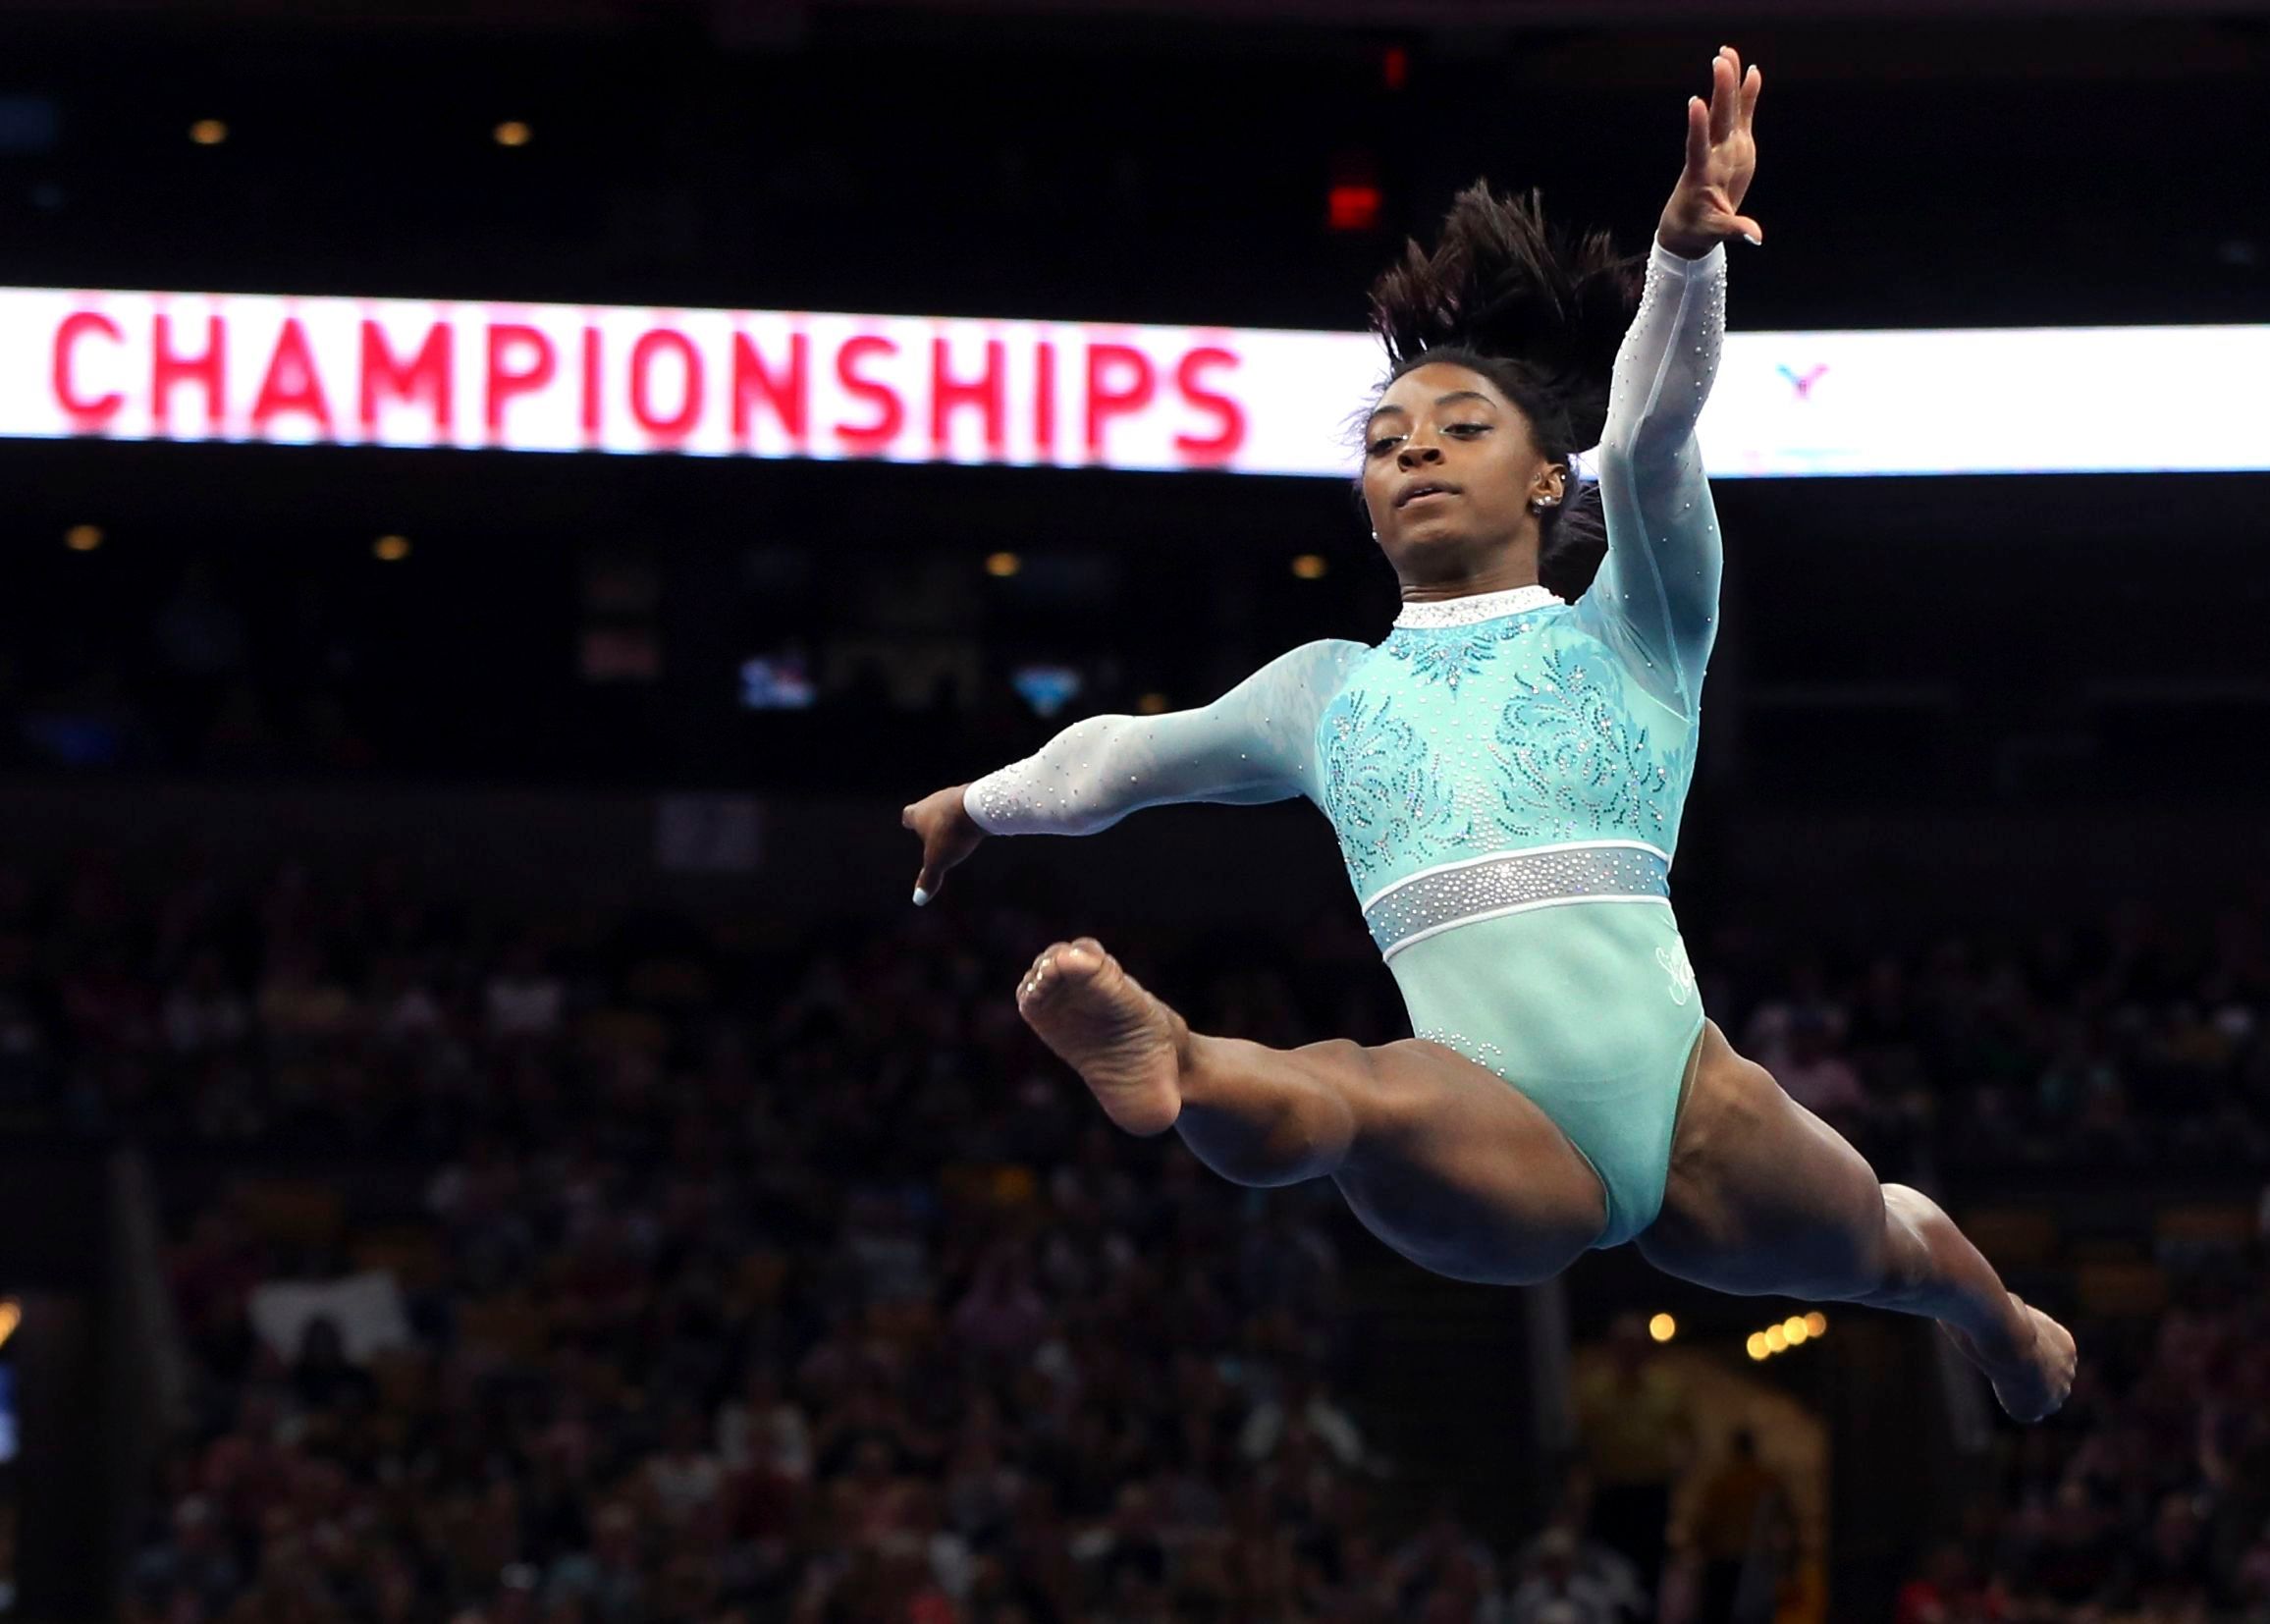 Mandatory Credit: Photo by Elise Amendola/AP/REX/Shutterstock (9794399g)
                      Simone Biles competes on the floor exercise at the U.S. Gymnastics Championships, in Boston
                      US Championships Gymnastics, Boston, USA - 19 Aug 2018 (Elise Amendola/AP/REX/Shutterstock&mdash;Elise Amendola/AP/REX/Shutterstock)